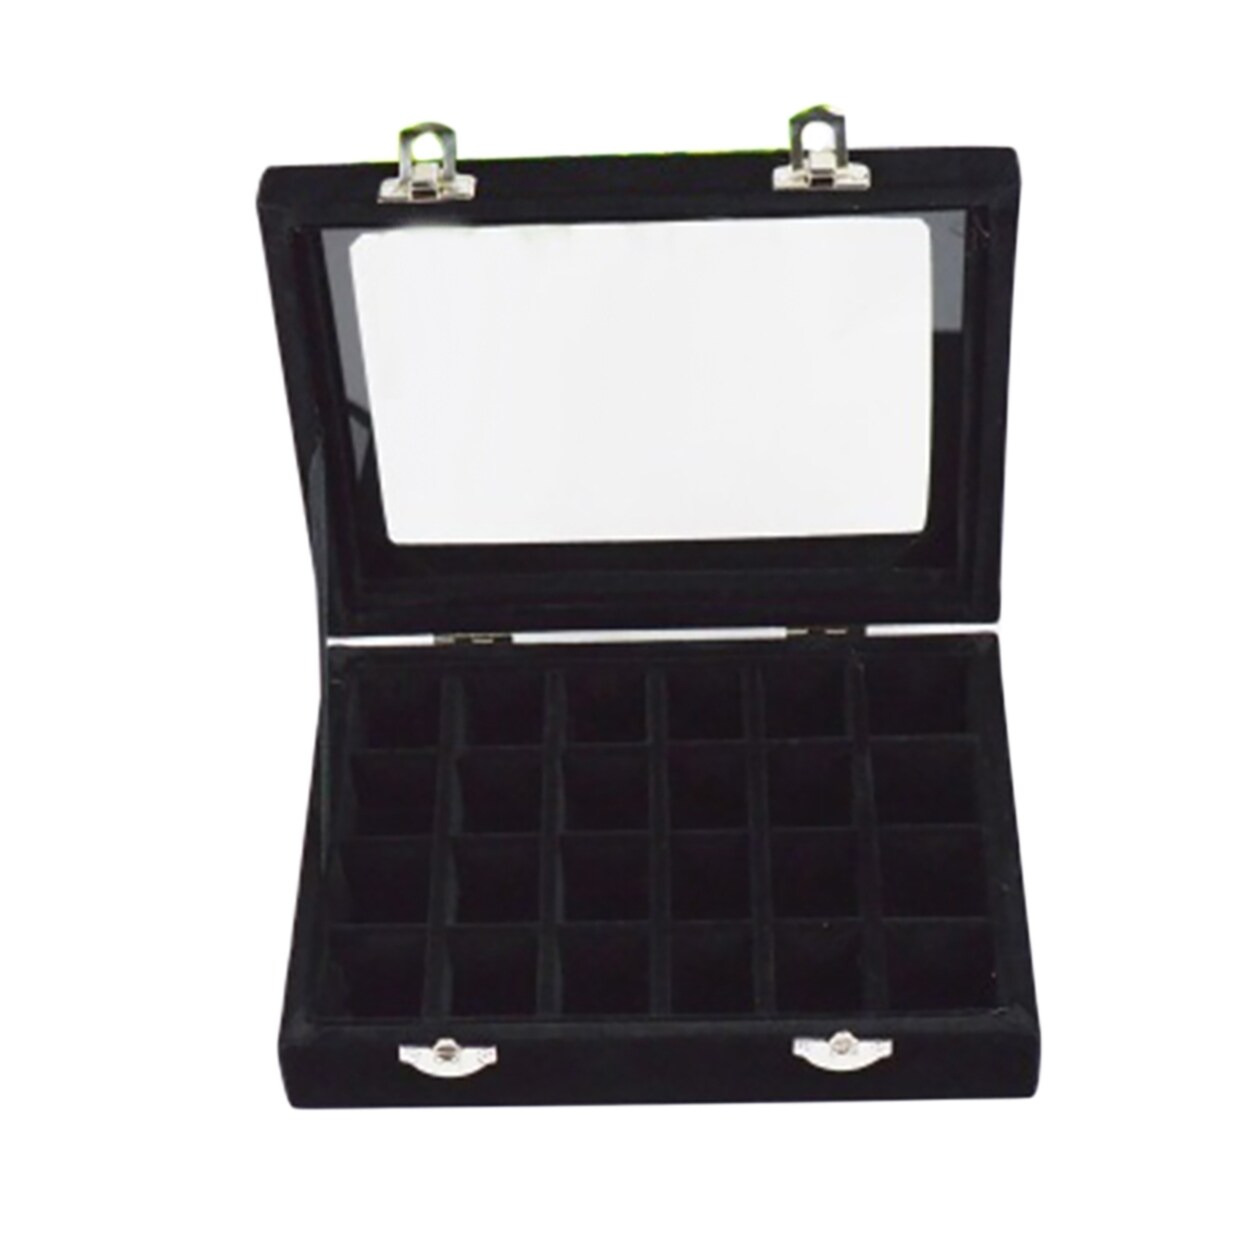 Generic Holder Case Lightweight Portable Women Mirrow Compact Jewelry Holder Case for Brooch